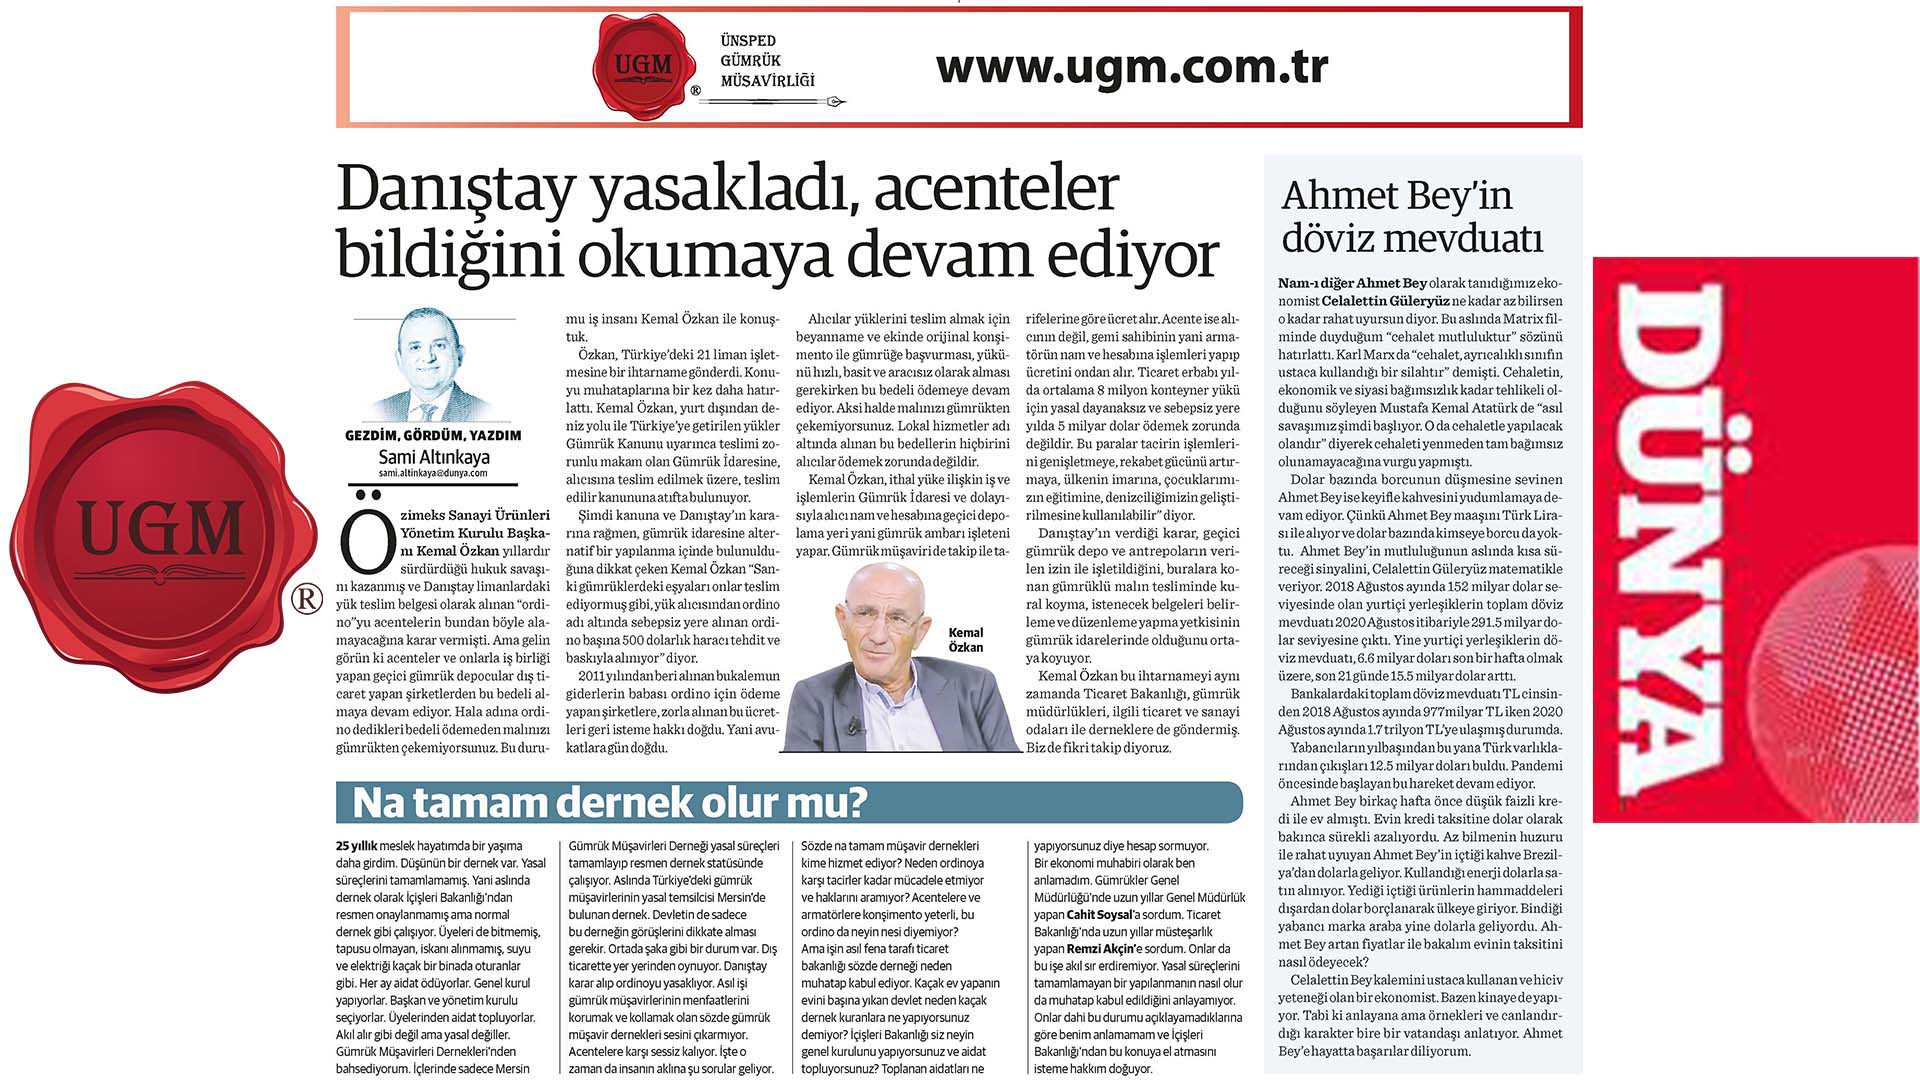 Our UGM Corporate Communications Director Sami Altınkaya's article entitled "State Council banned, agencies continue to perform what they want" was published in the Dünya newspaper on 17.08.2020.